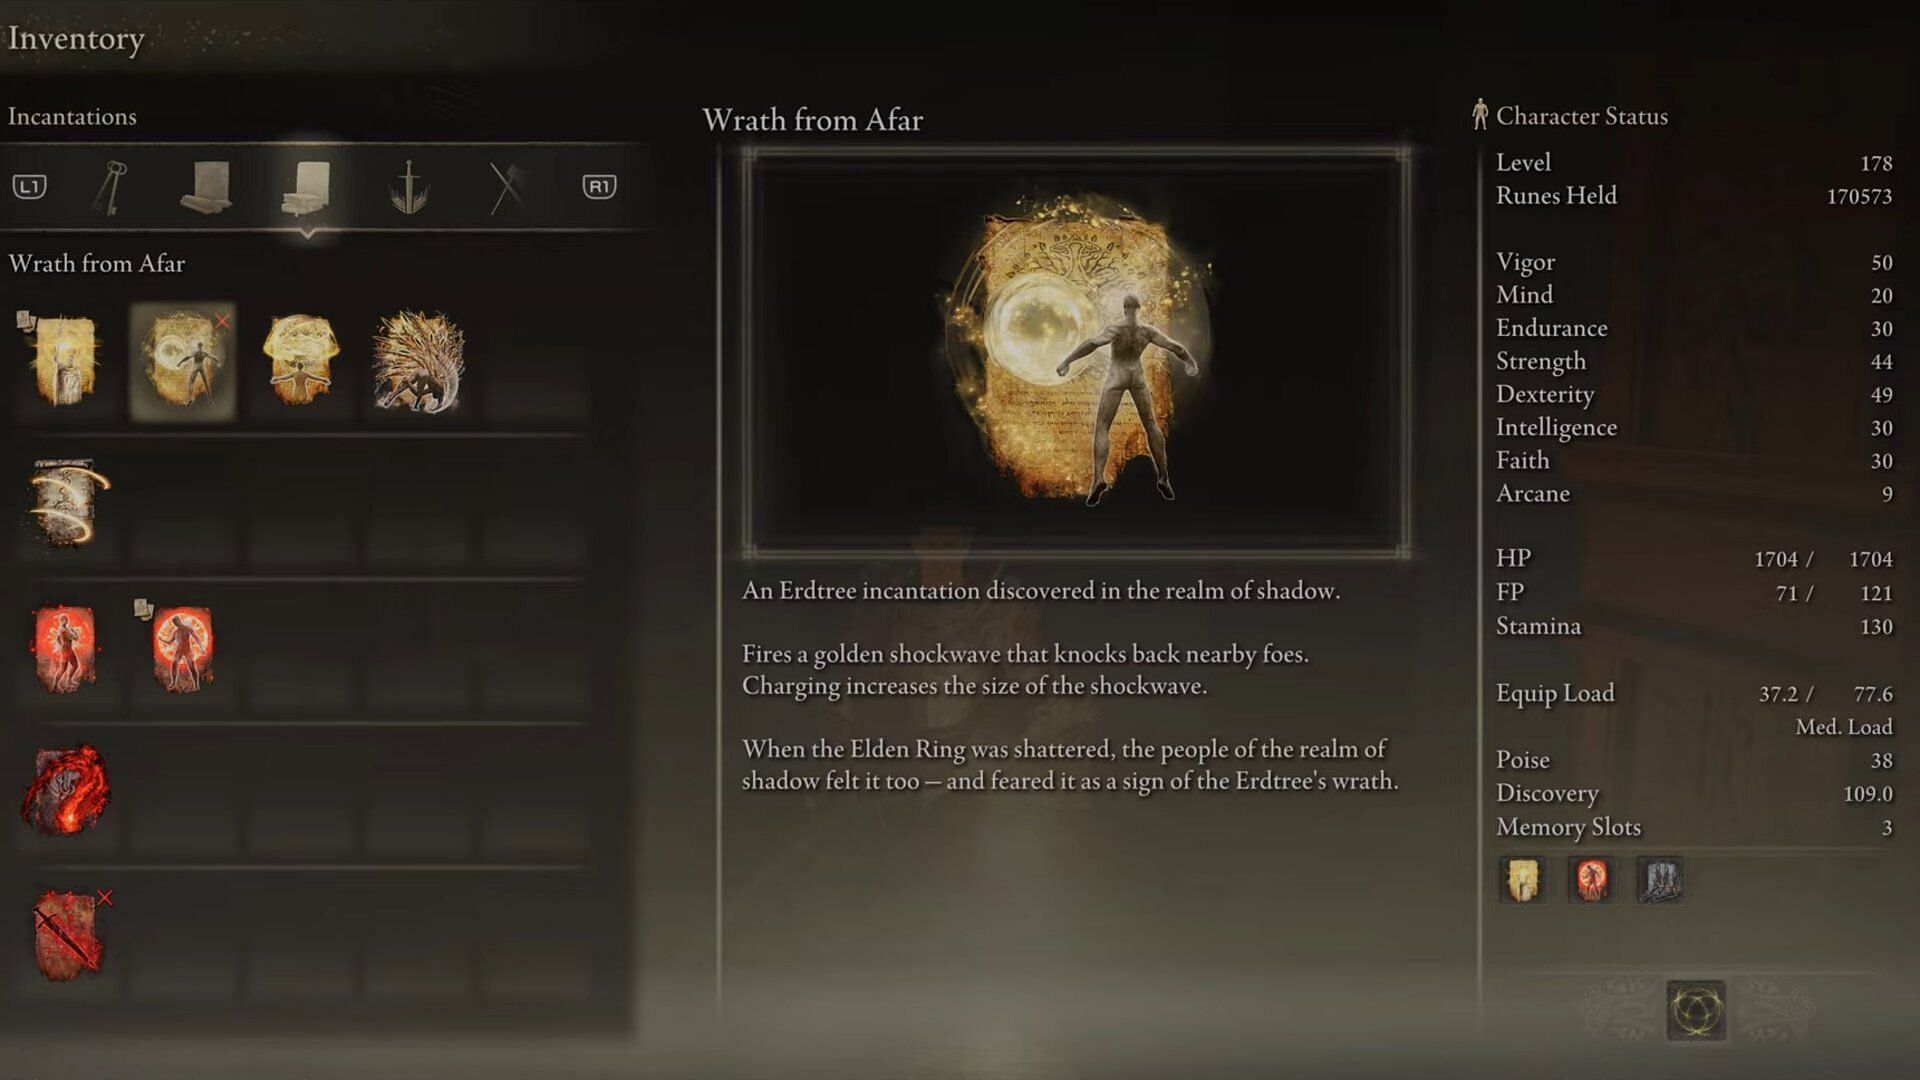 Wrath from Afar in the inventory (Image via FromSoftware || Gamer Guru on YouTube)